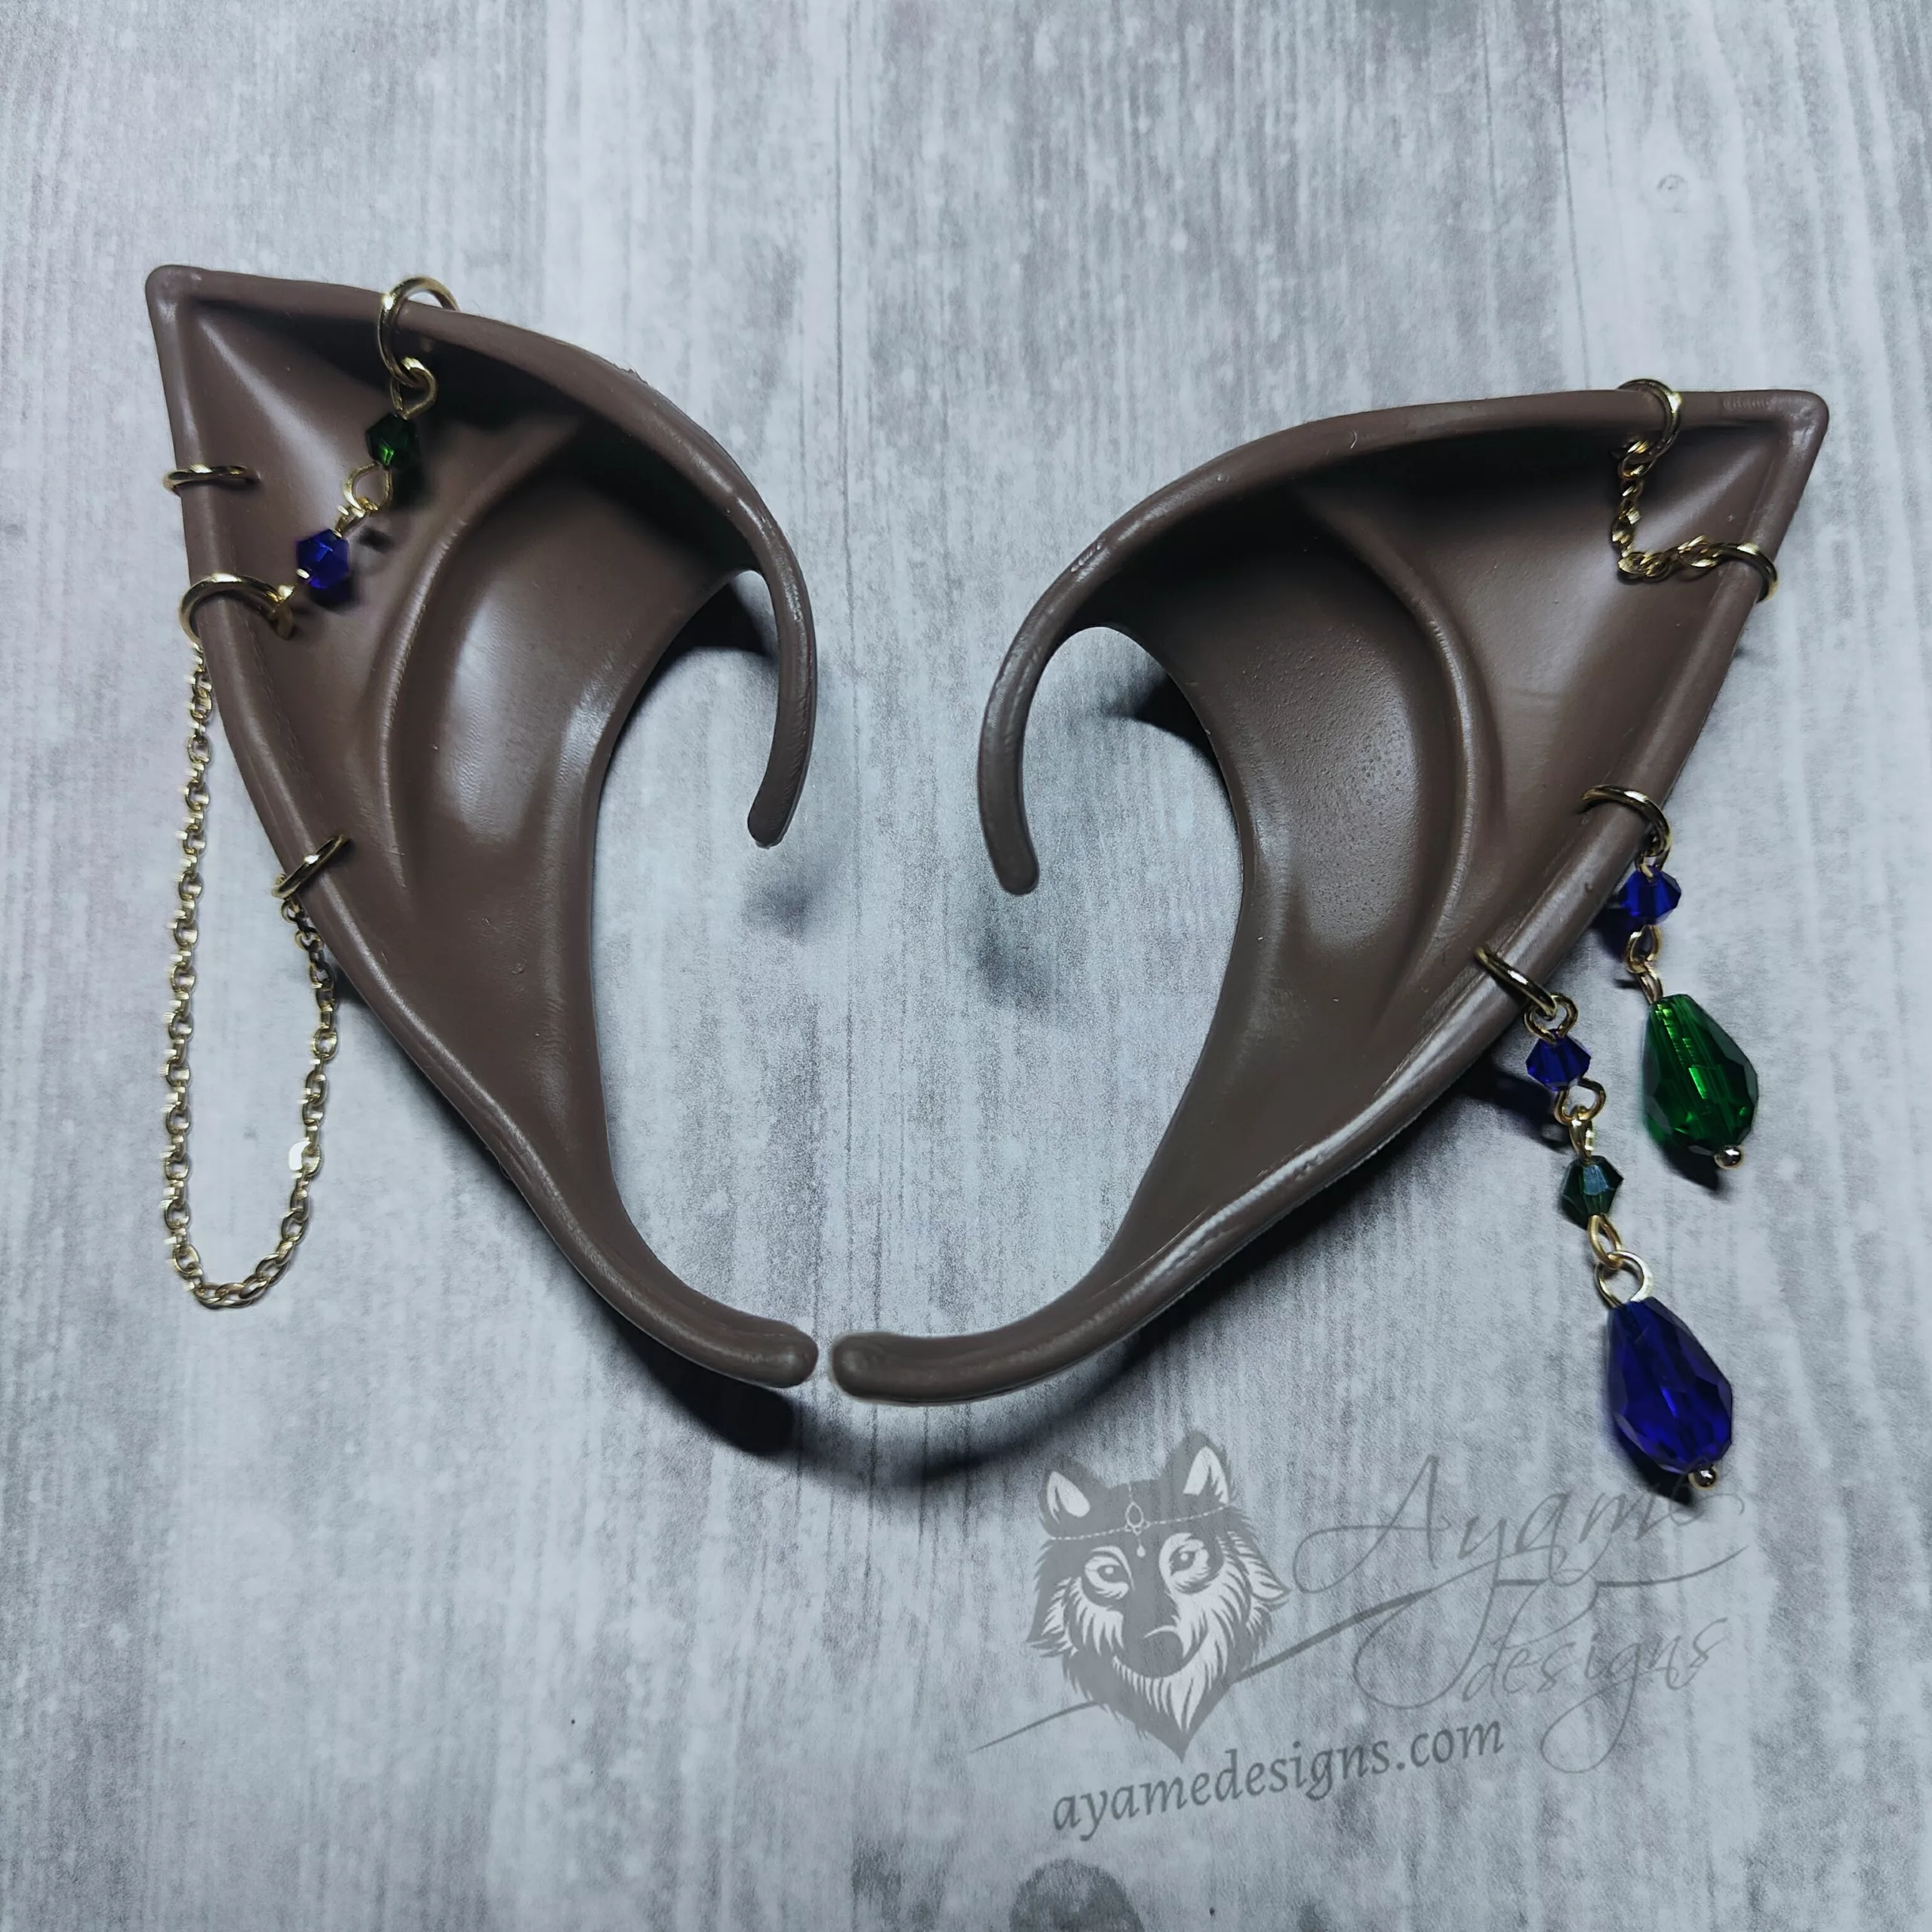 Dark brown skinned elf ears with many gold chains, and blue and green beads